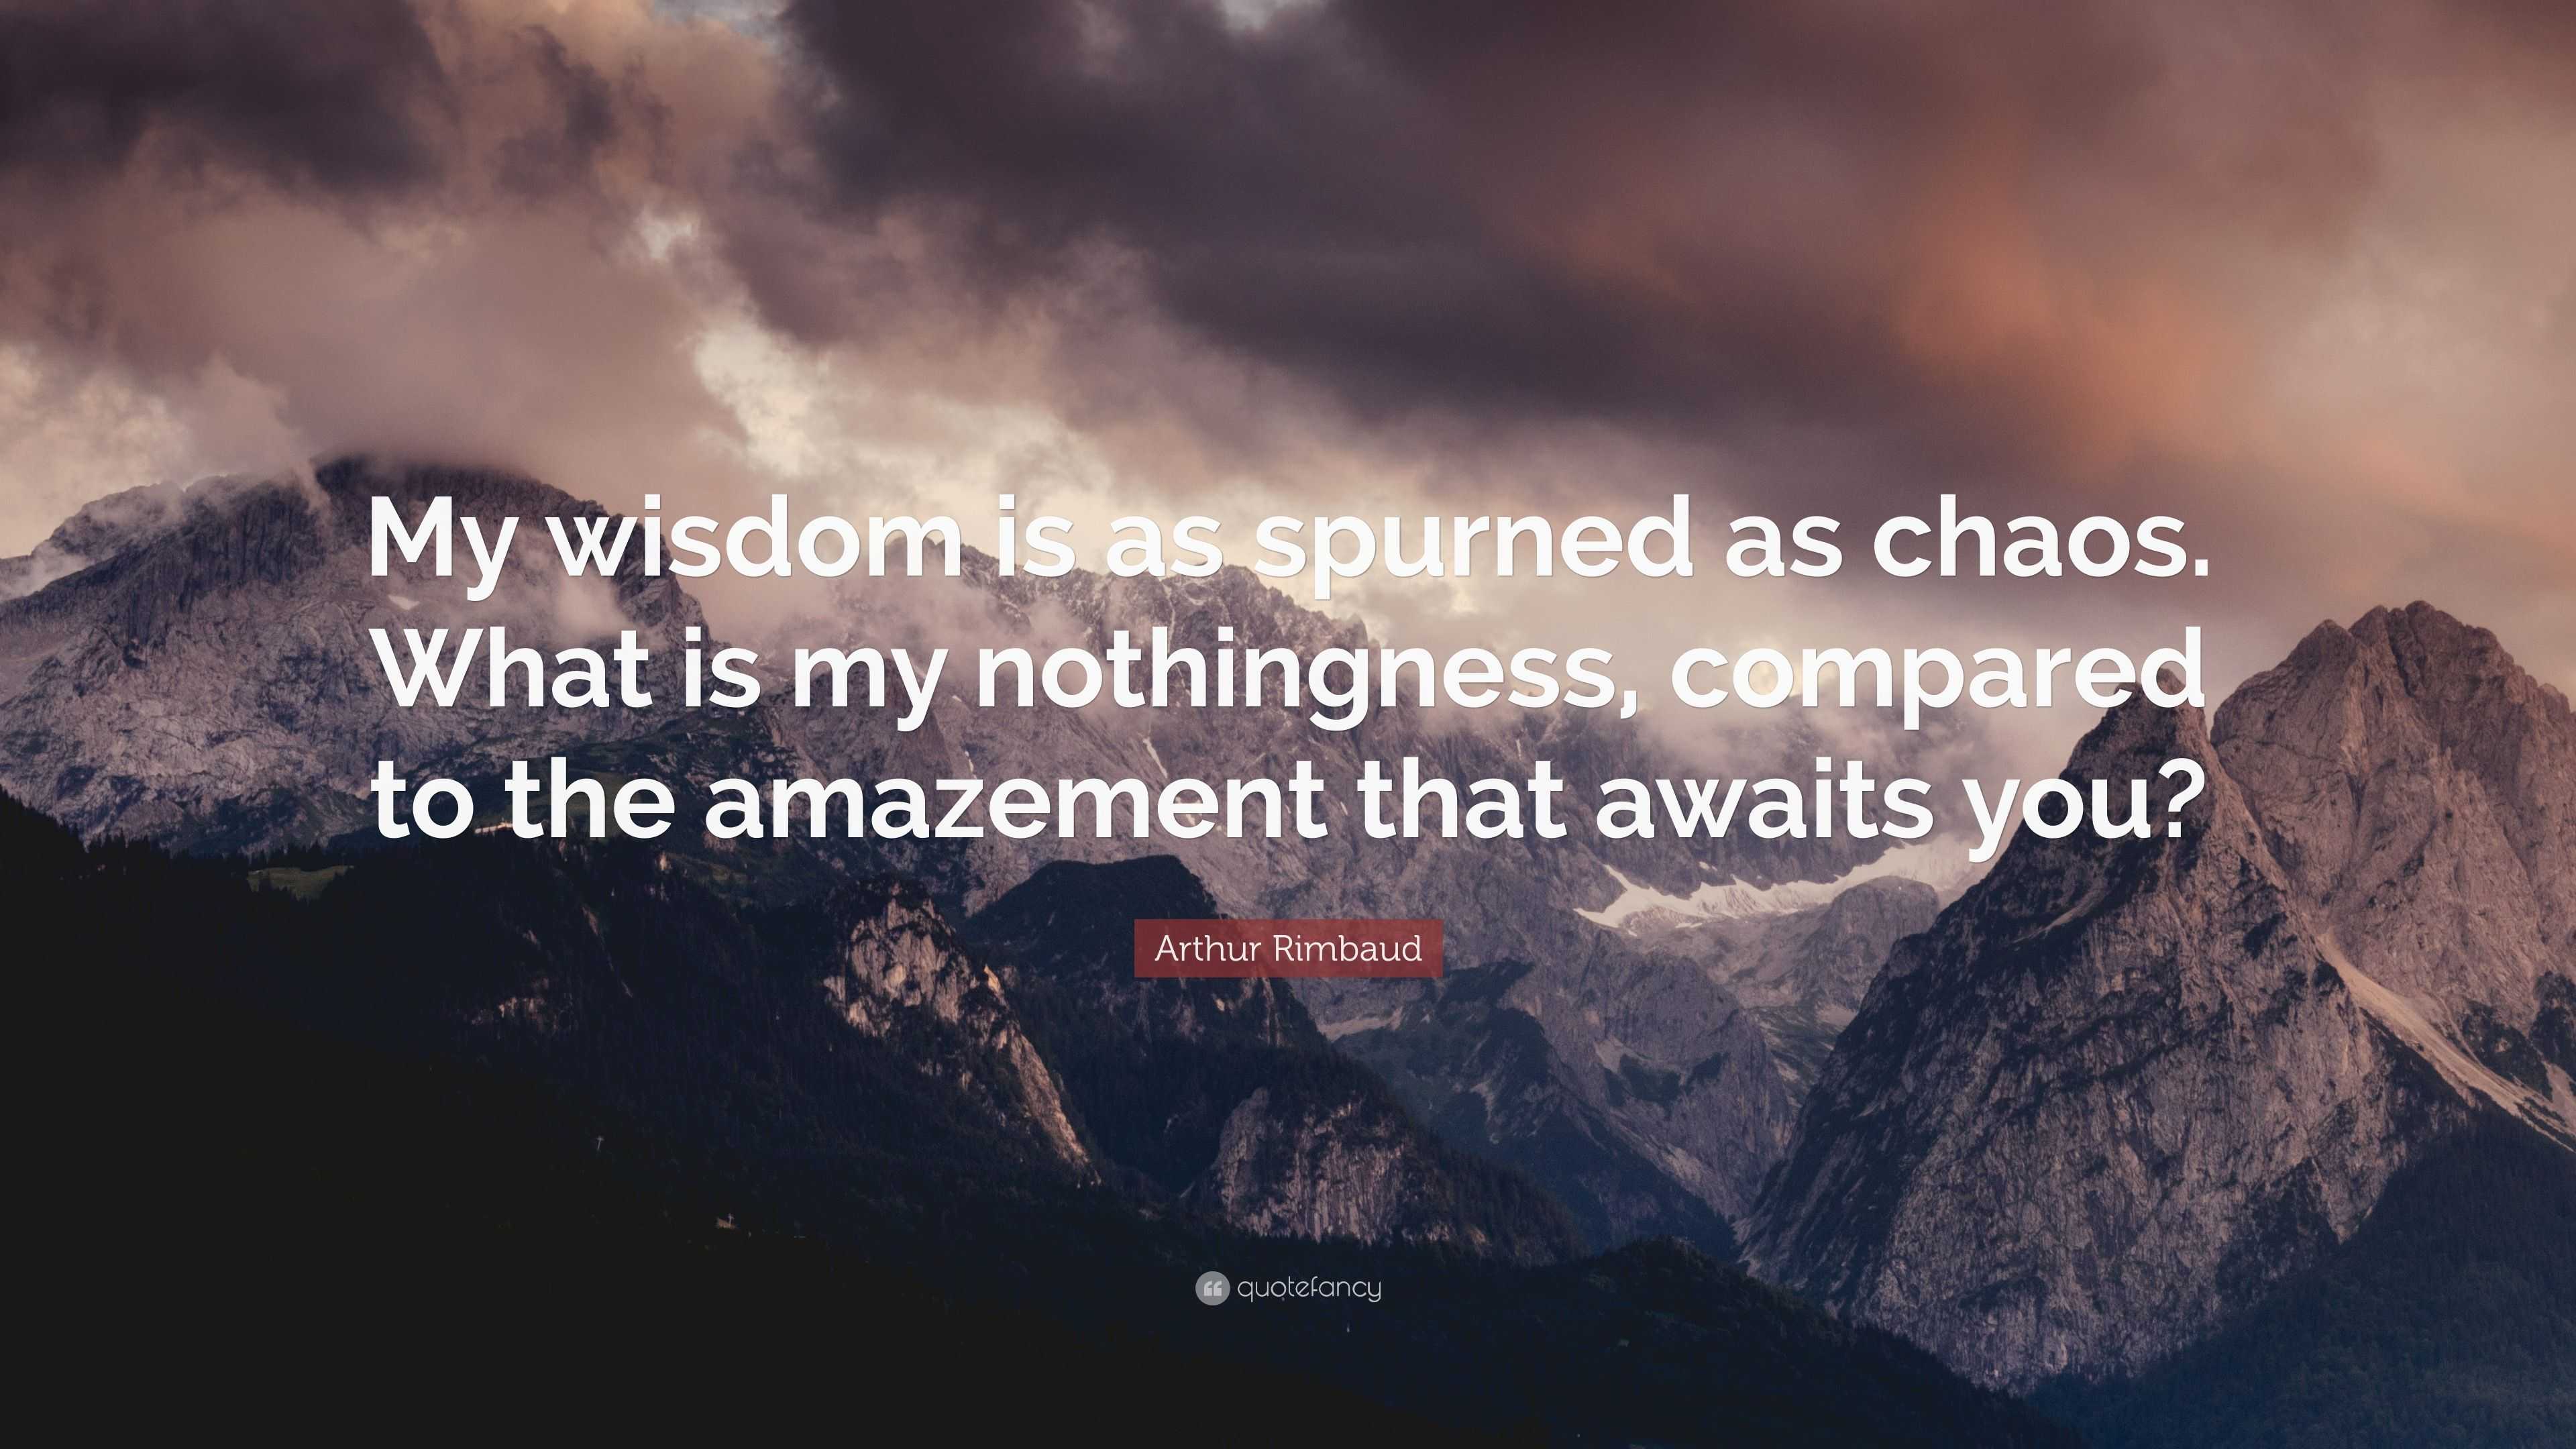 Arthur Rimbaud Quote: “My wisdom is as spurned as chaos. What is my ...